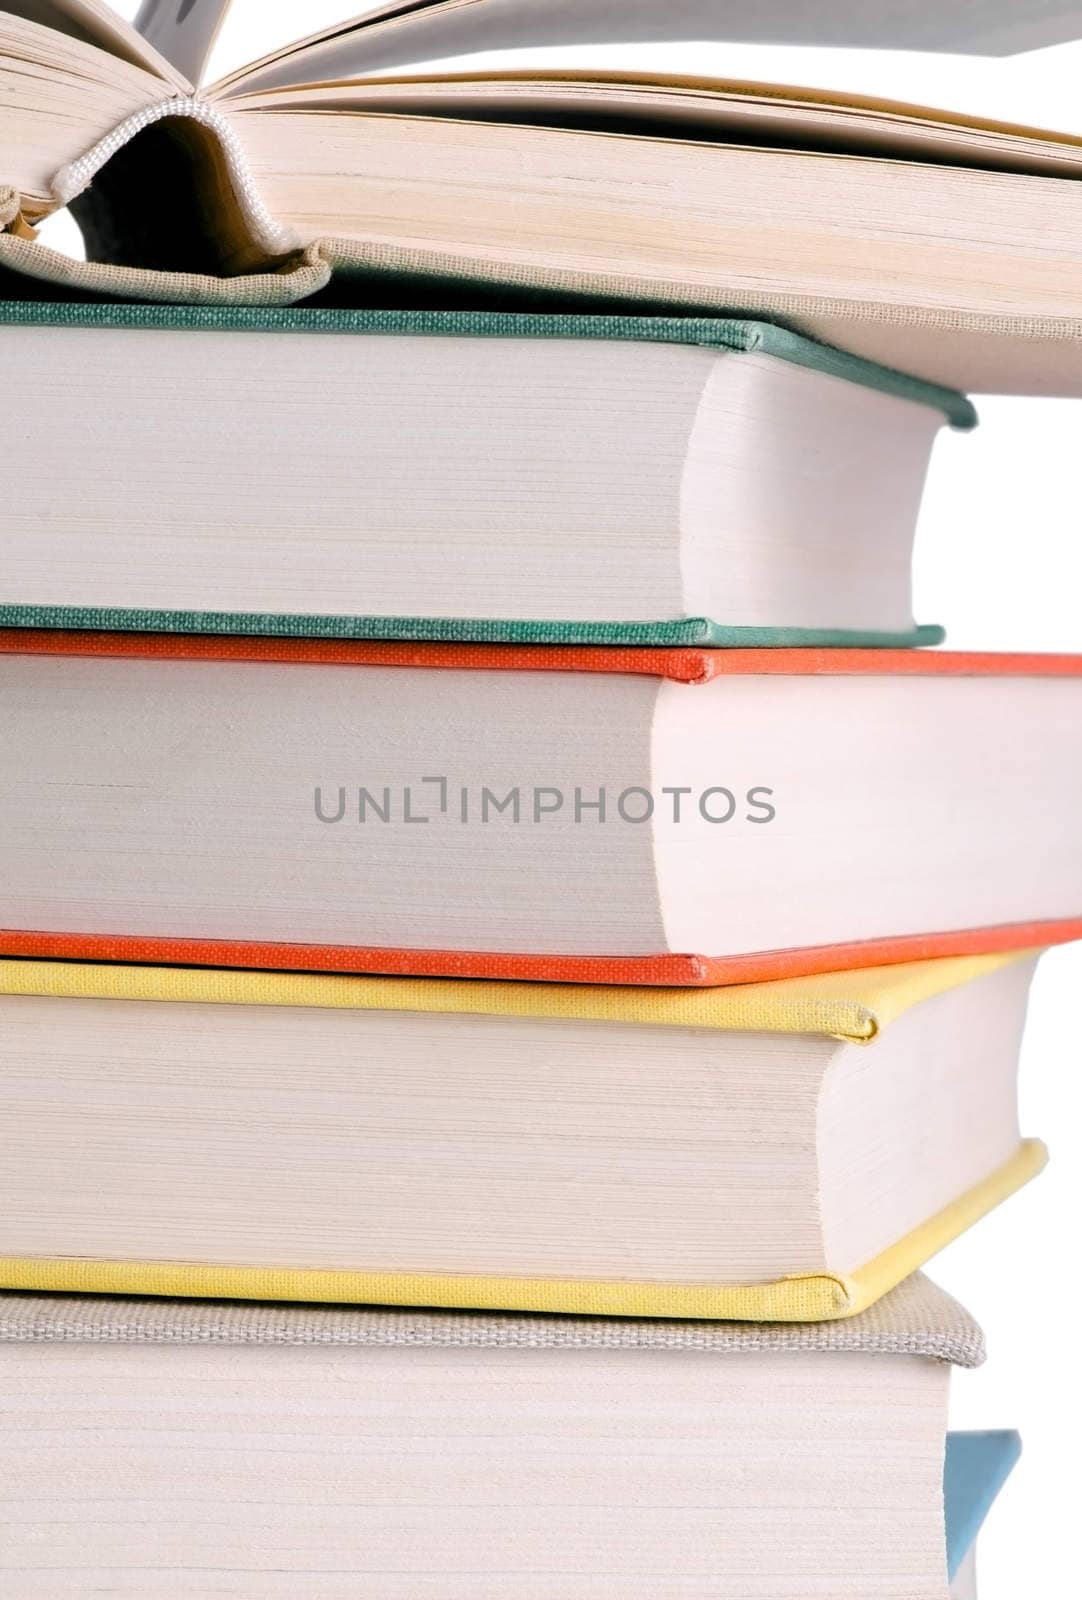 Column of books isolated on white background.